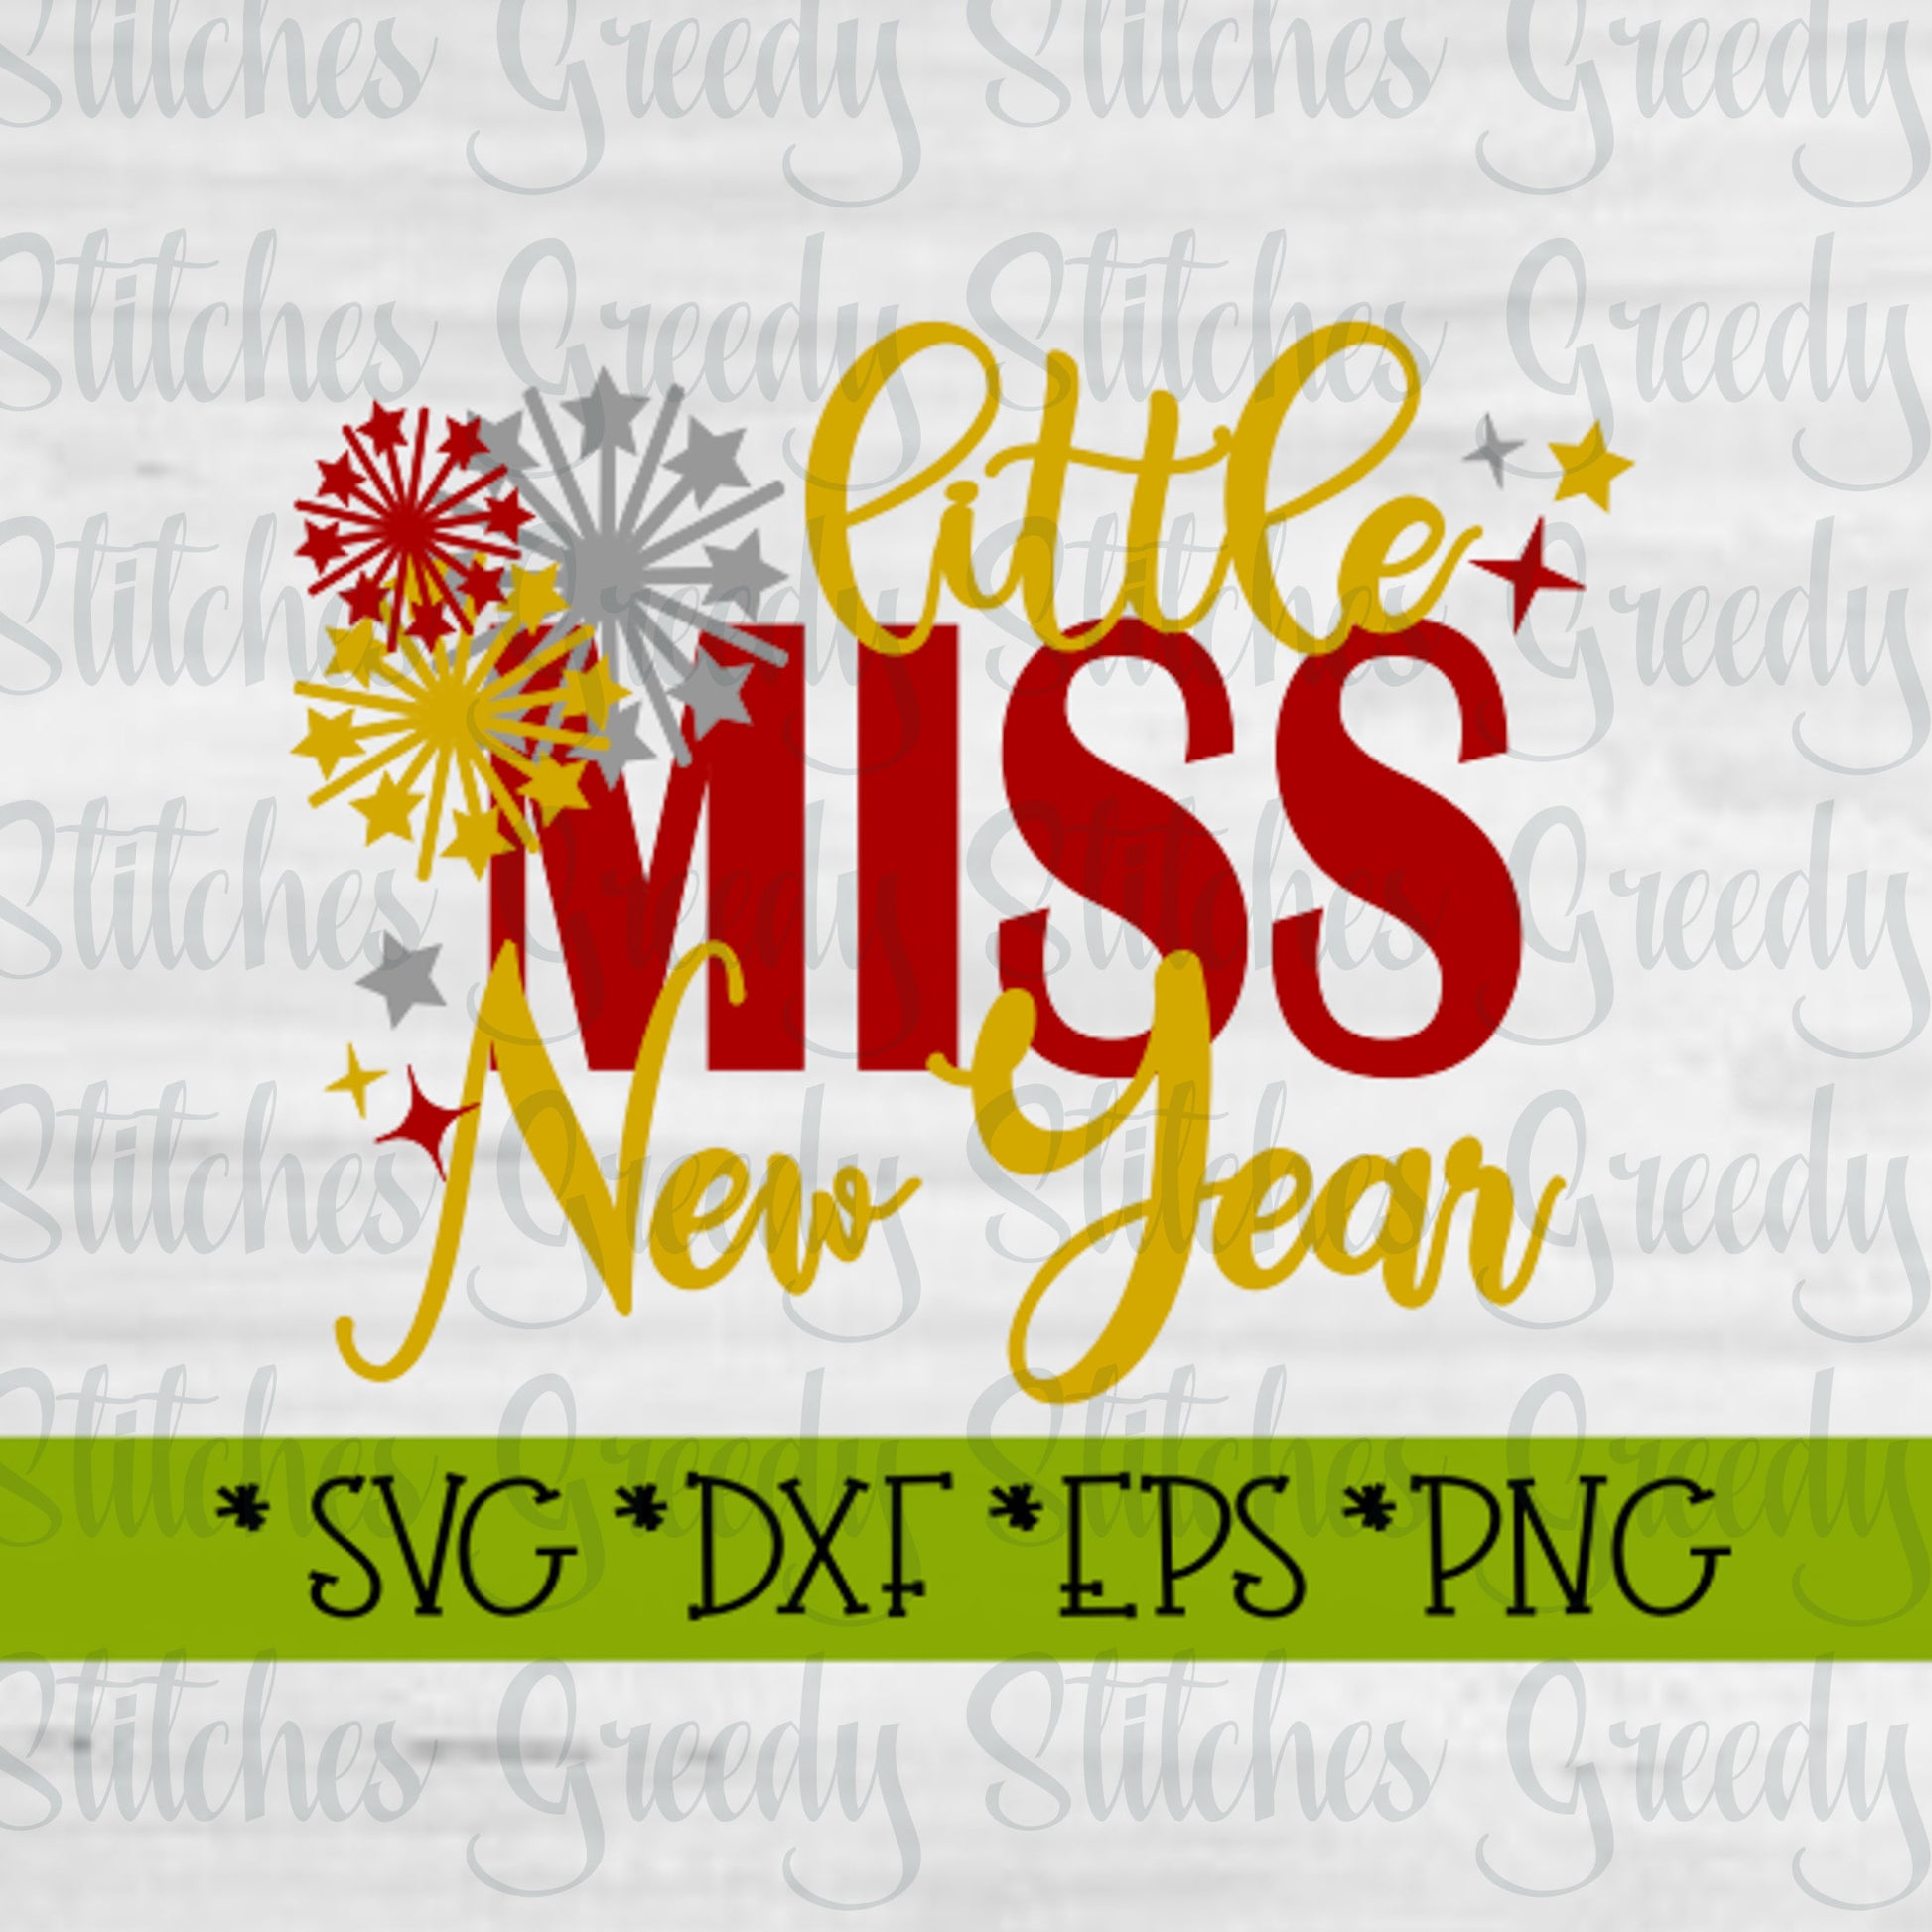 New Years SvG | Little Miss New Year svg, dxf, eps, png | New Year SvG | Happy New Year DXF | New Year SvG | Instant Download Cut Files